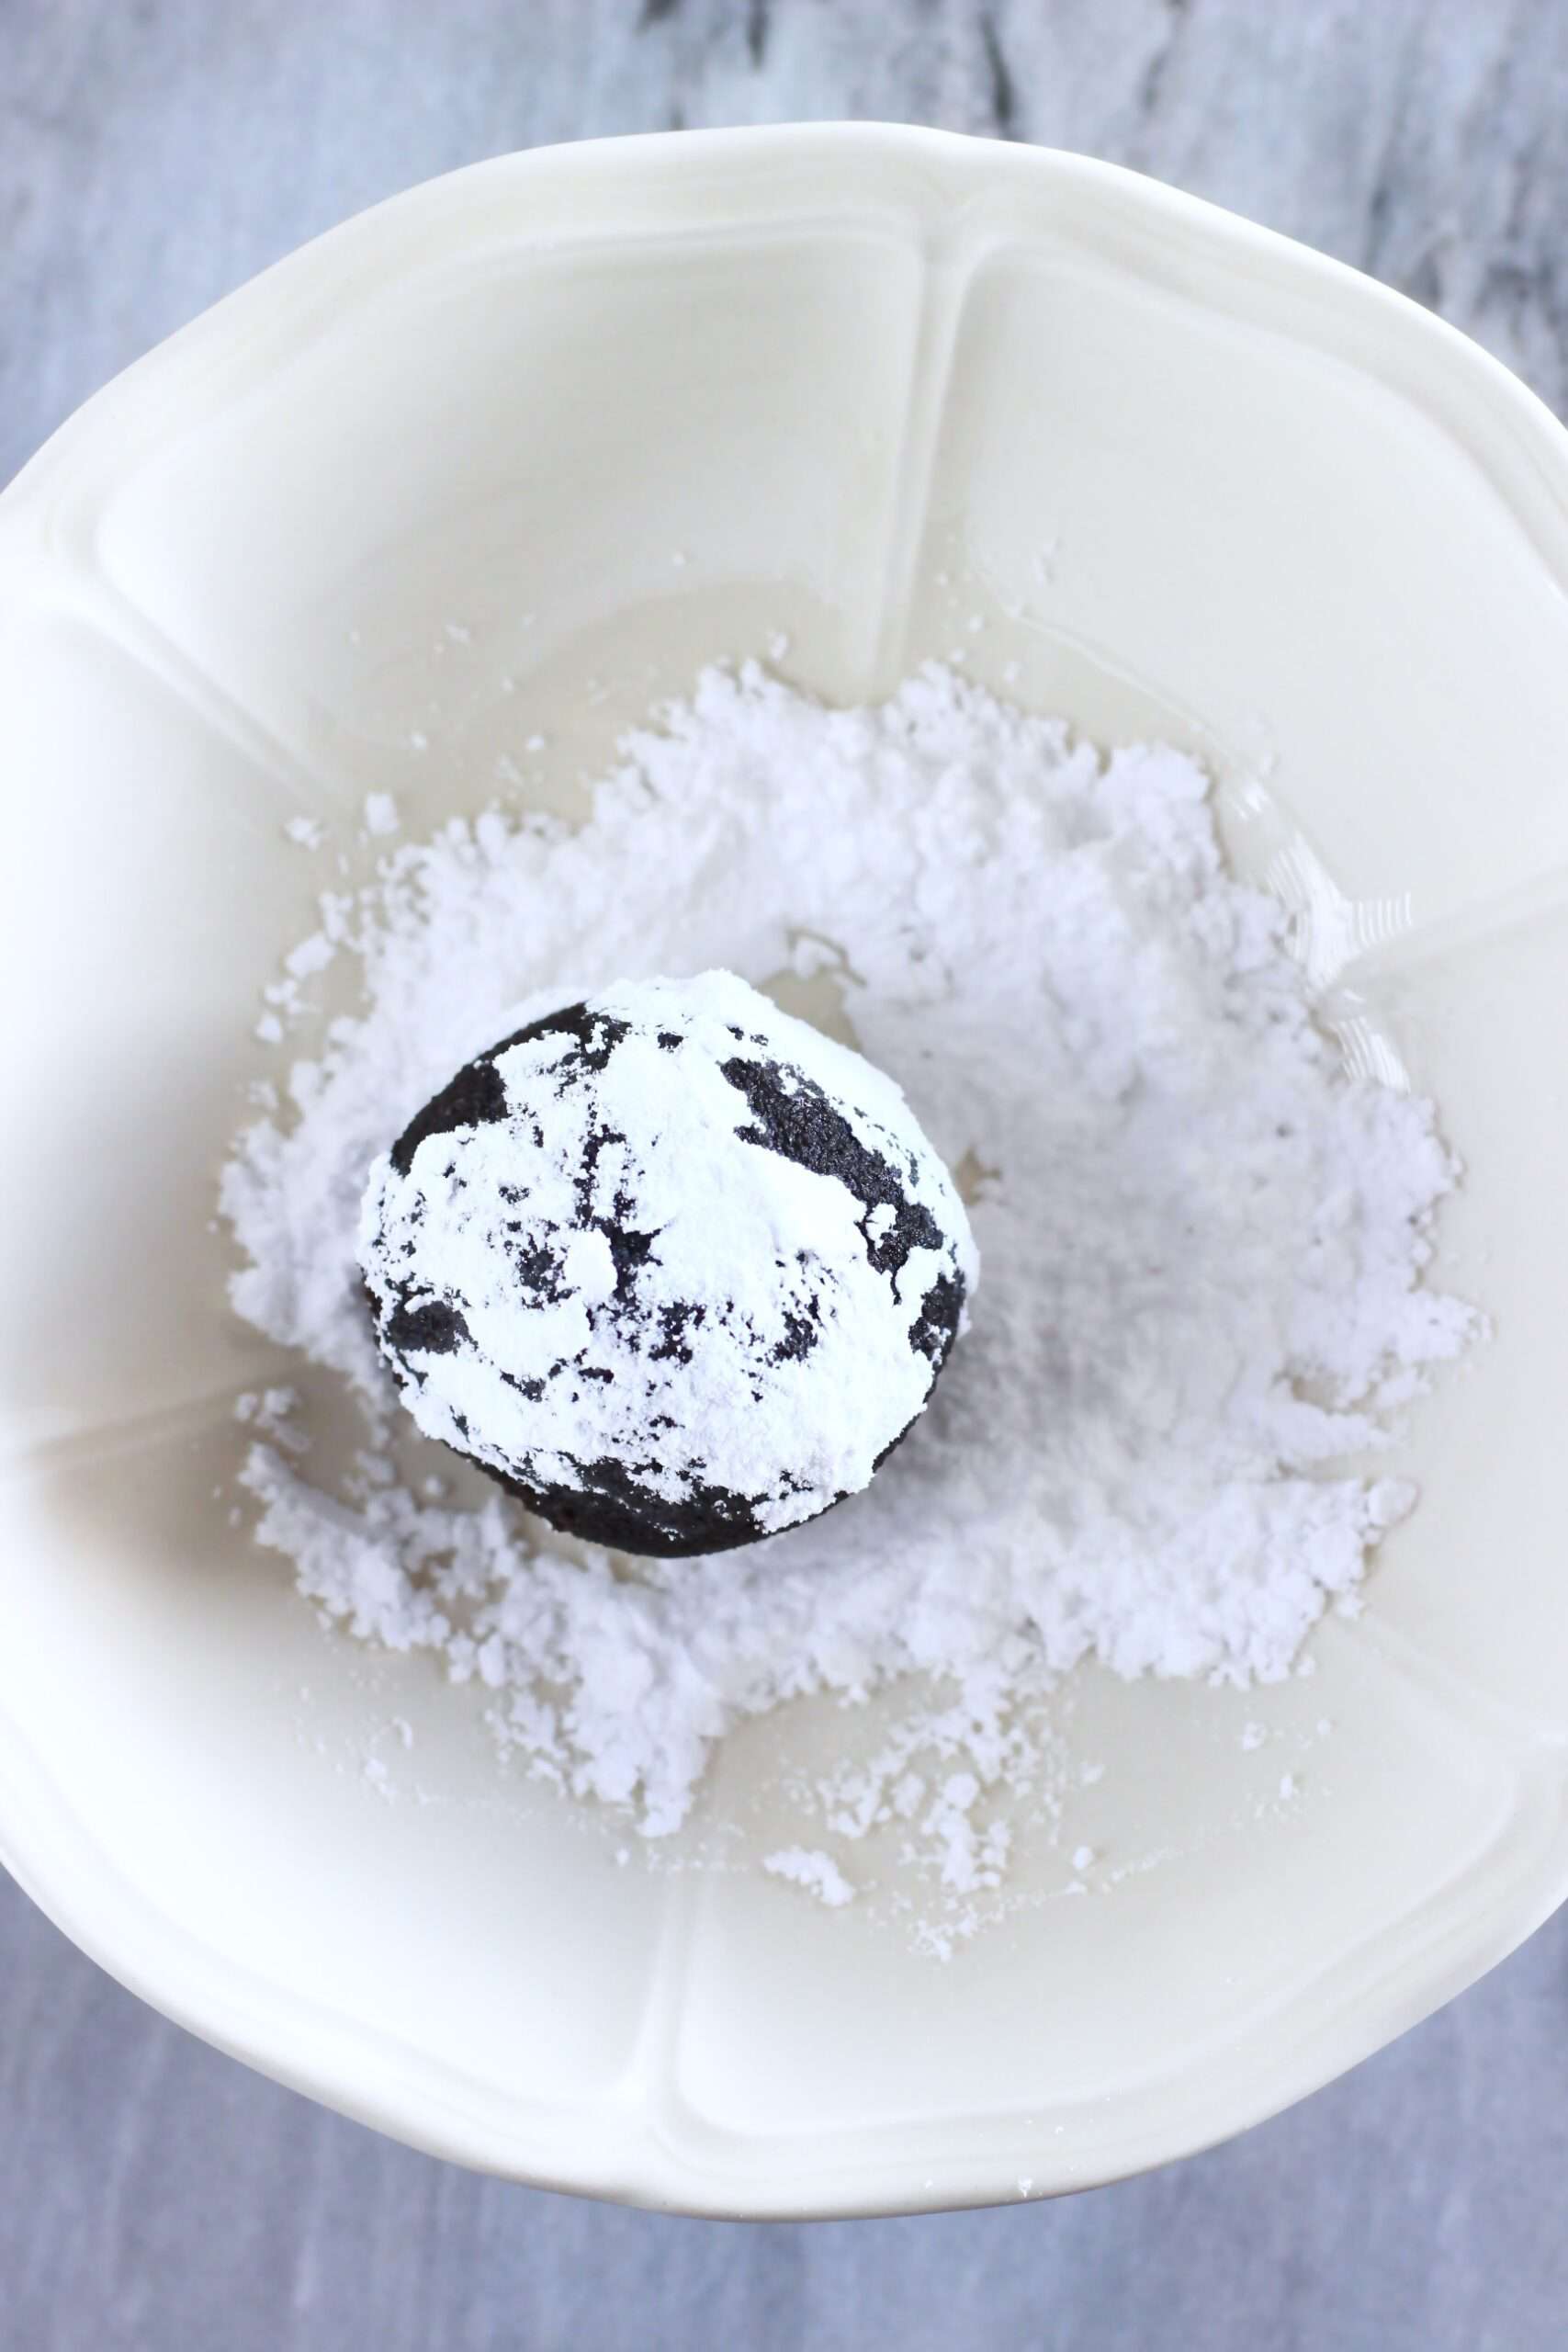 A ball of gluten-free vegan chocolate cookie dough in a bowl of powdered sugar